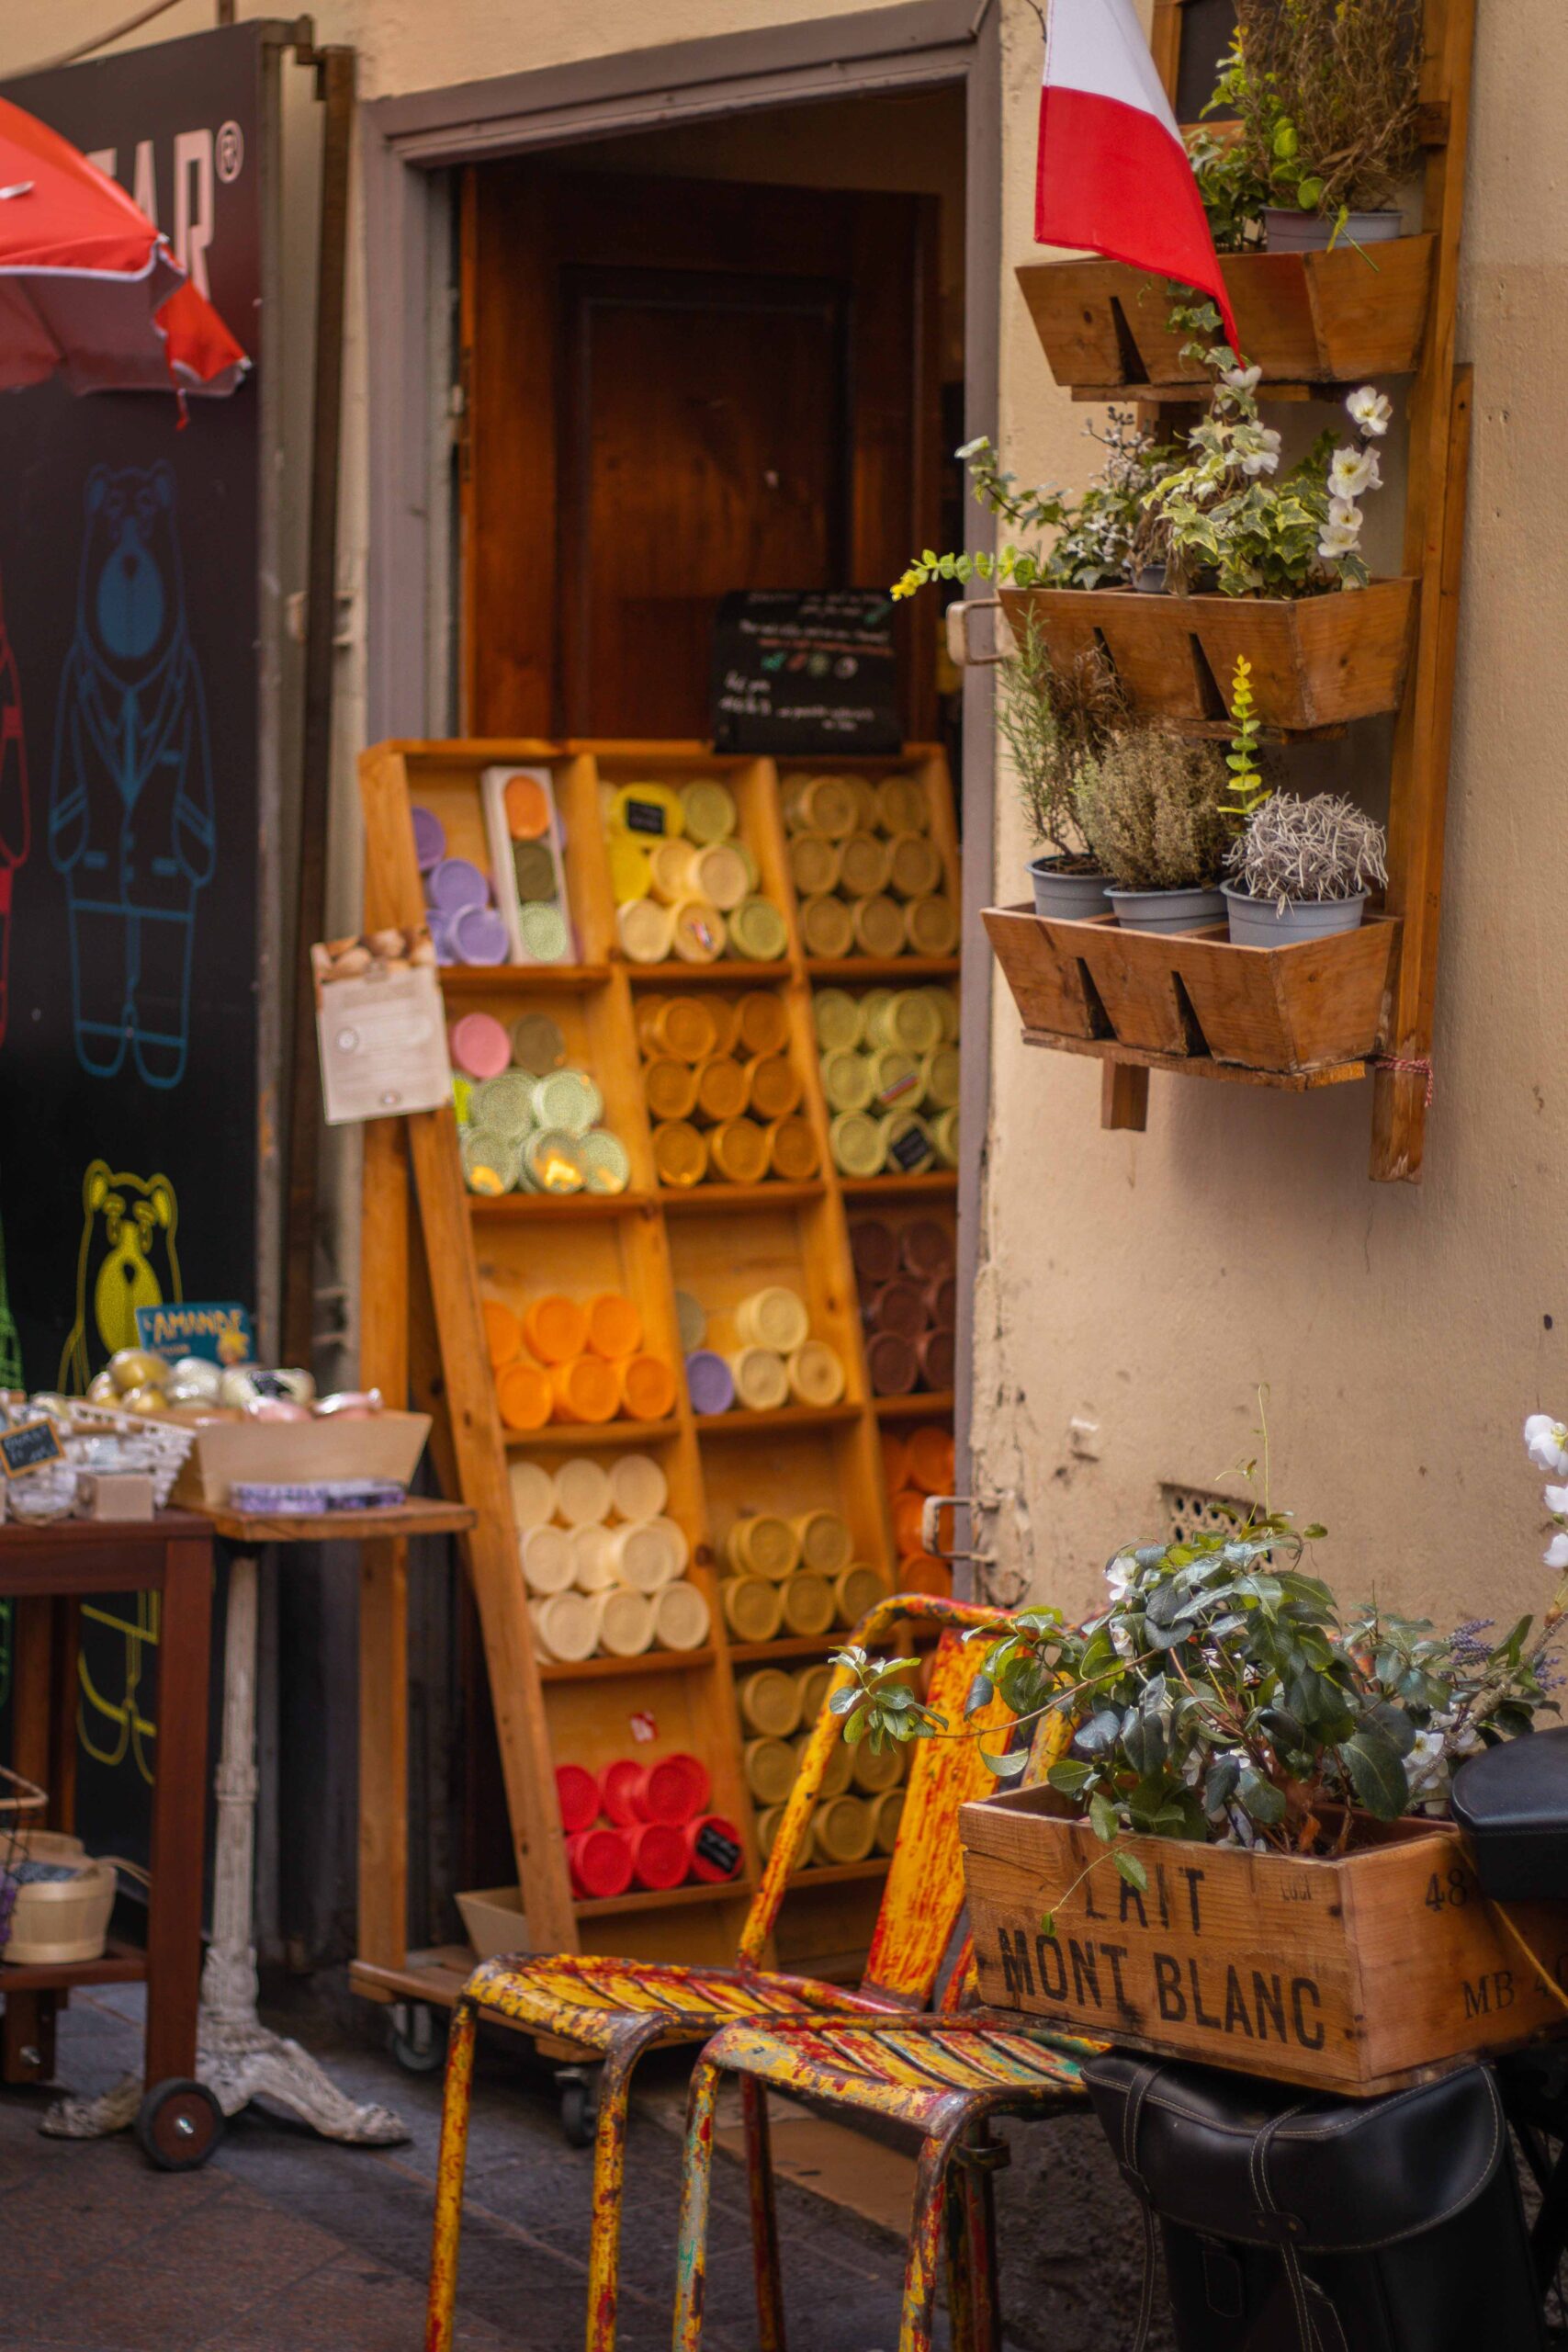 Small shop in the Old Town of Nice (Vieux-Nice) selling soaps, plants and crafts in Nice, France